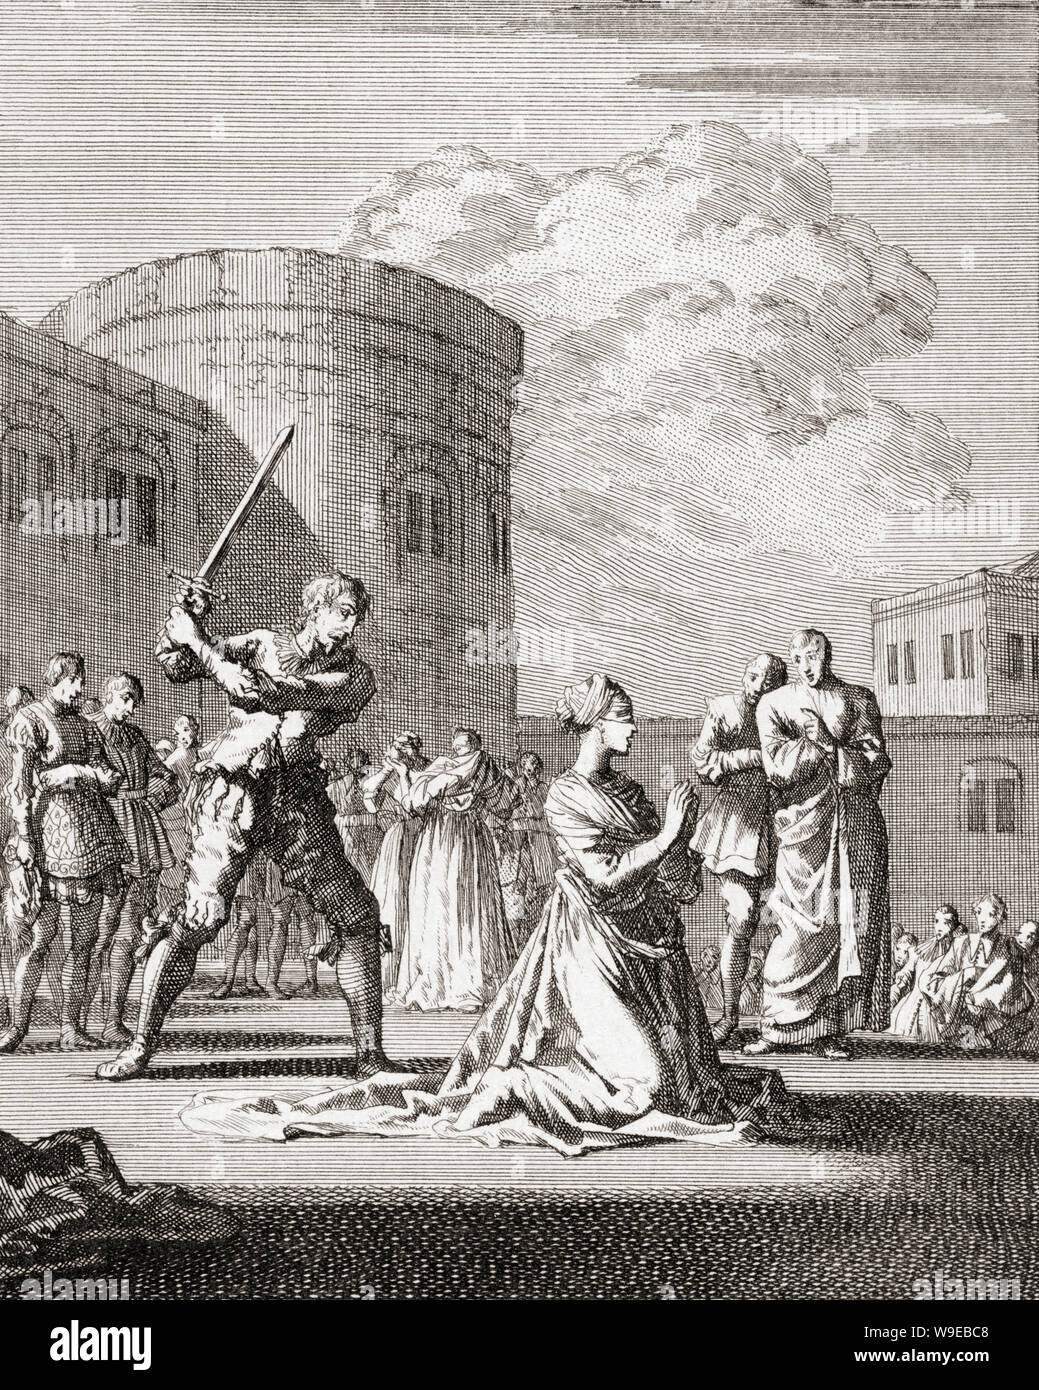 The execution of Anne Boleyn, Queen of England, wife of King Henry VIII, on May 19, 1536.  After a work by Jan Luyken. Stock Photo